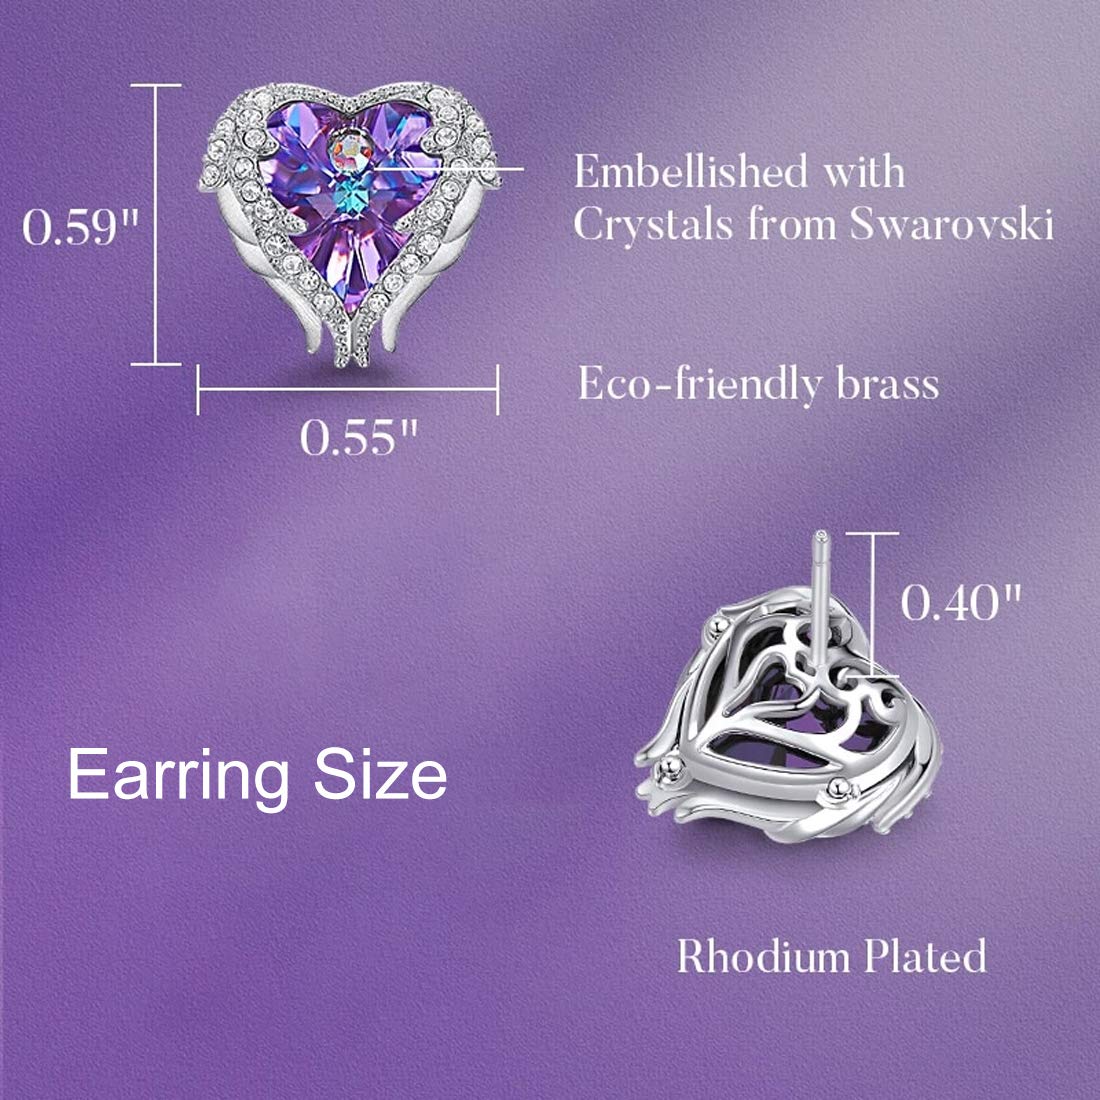 Yellow Chimes Earrings for Women and Girls Purple Crystals from Swarovski Studs | Silver Toned Valentines Special Love Heart Stud Earrings for Women | Birthday Anniversary Gift for Wife Birthday Gift for Girls & Women